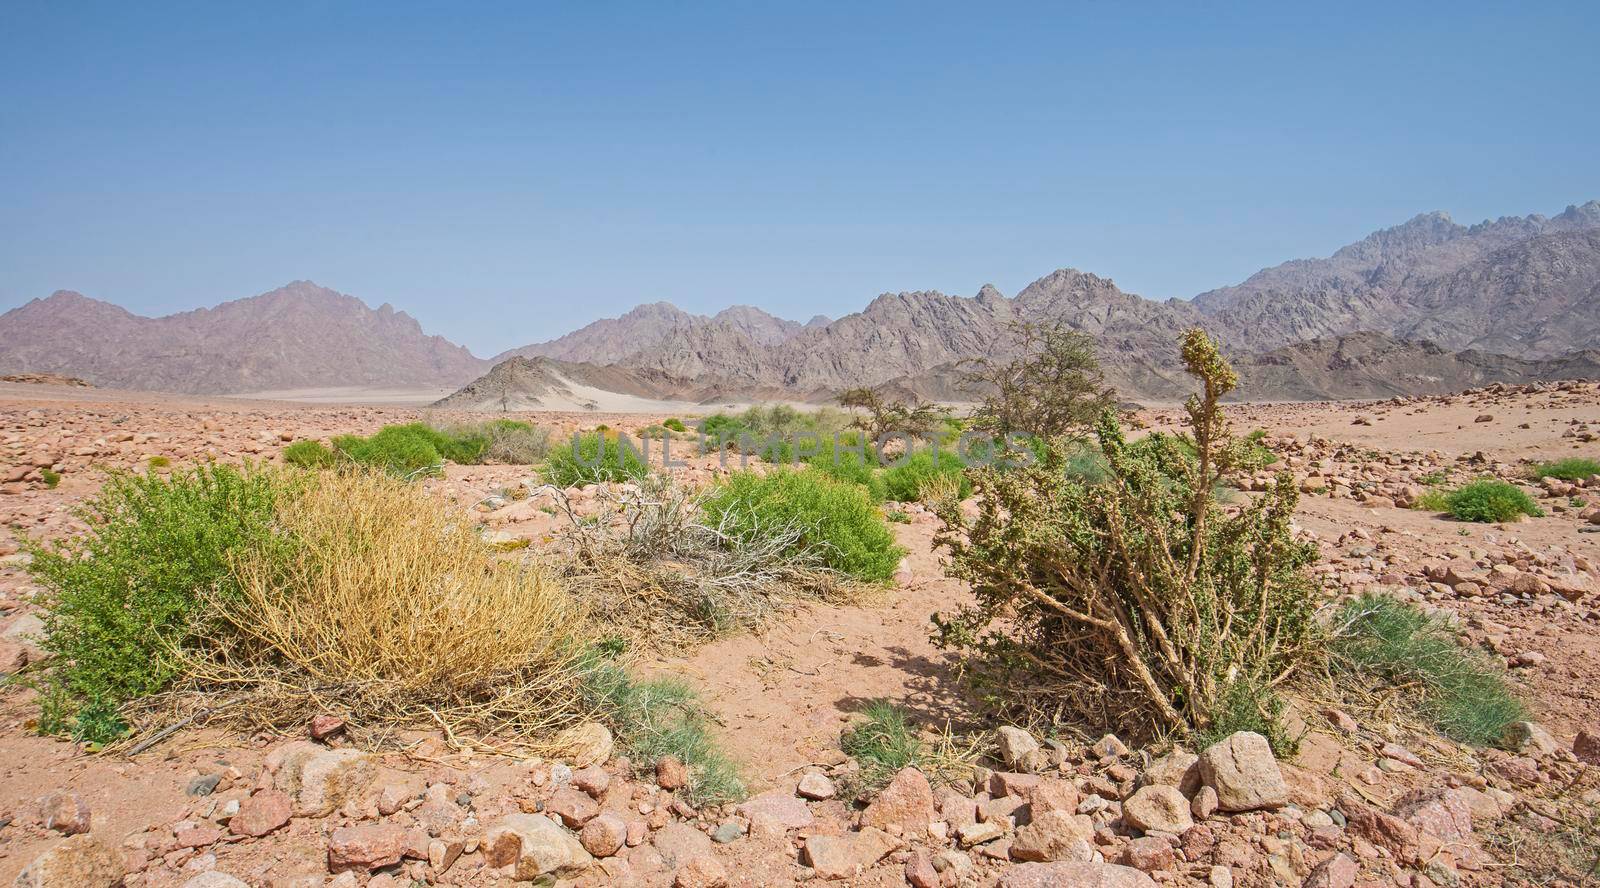 Landscape scenic view of desolate barren eastern desert in Egypt with bushes and mountains